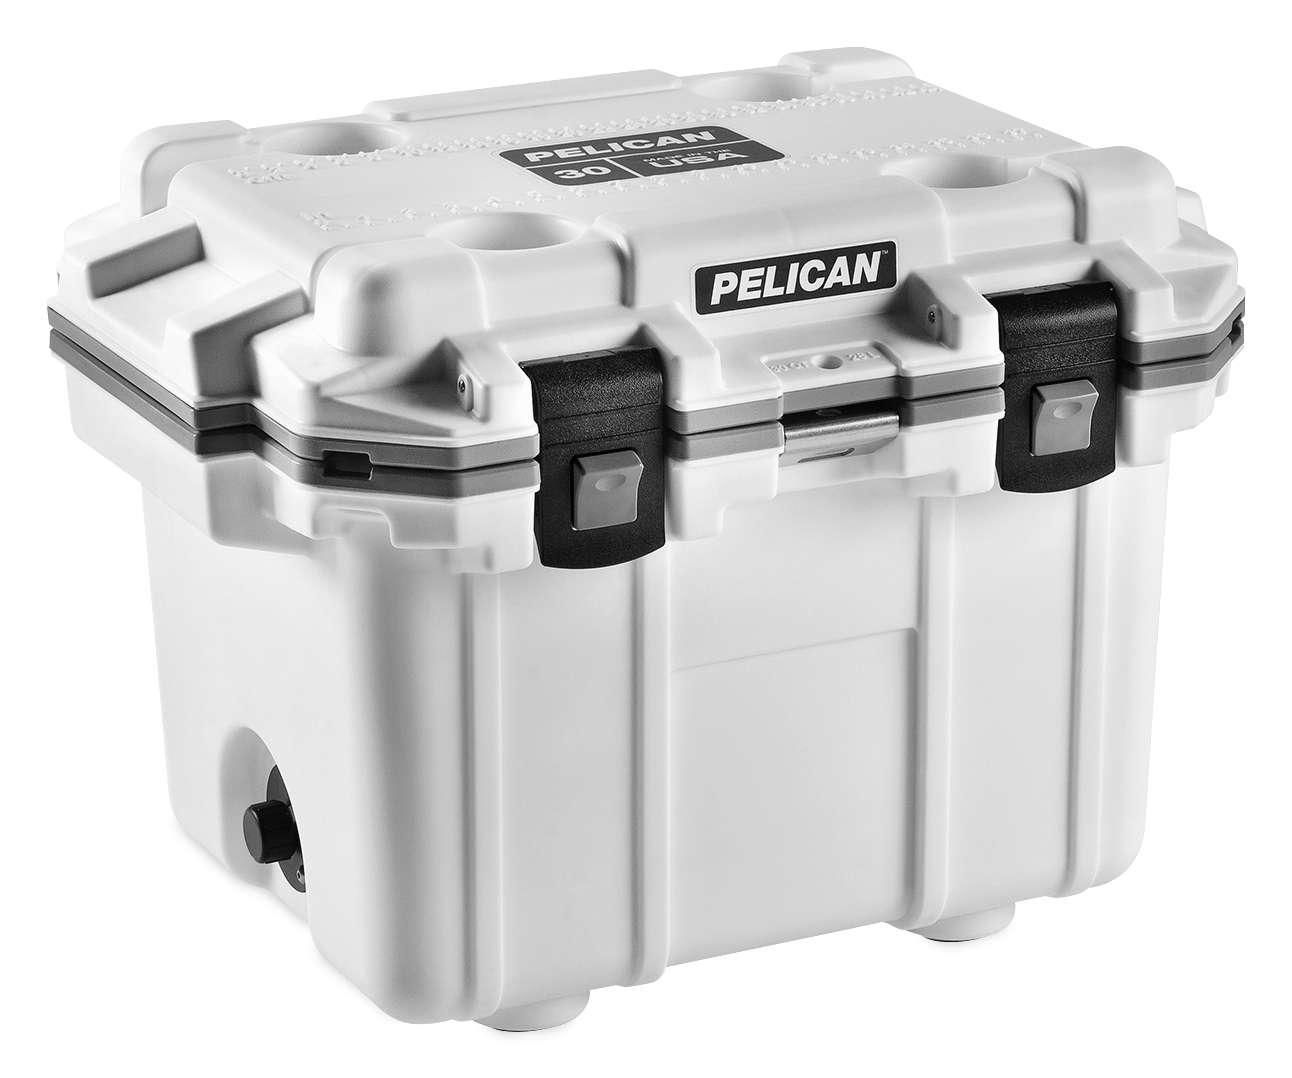 4PUS-PELICAN-P-30Q-1-WHTGRY 30 qt. Injection-Molded Cooler - White/Gray